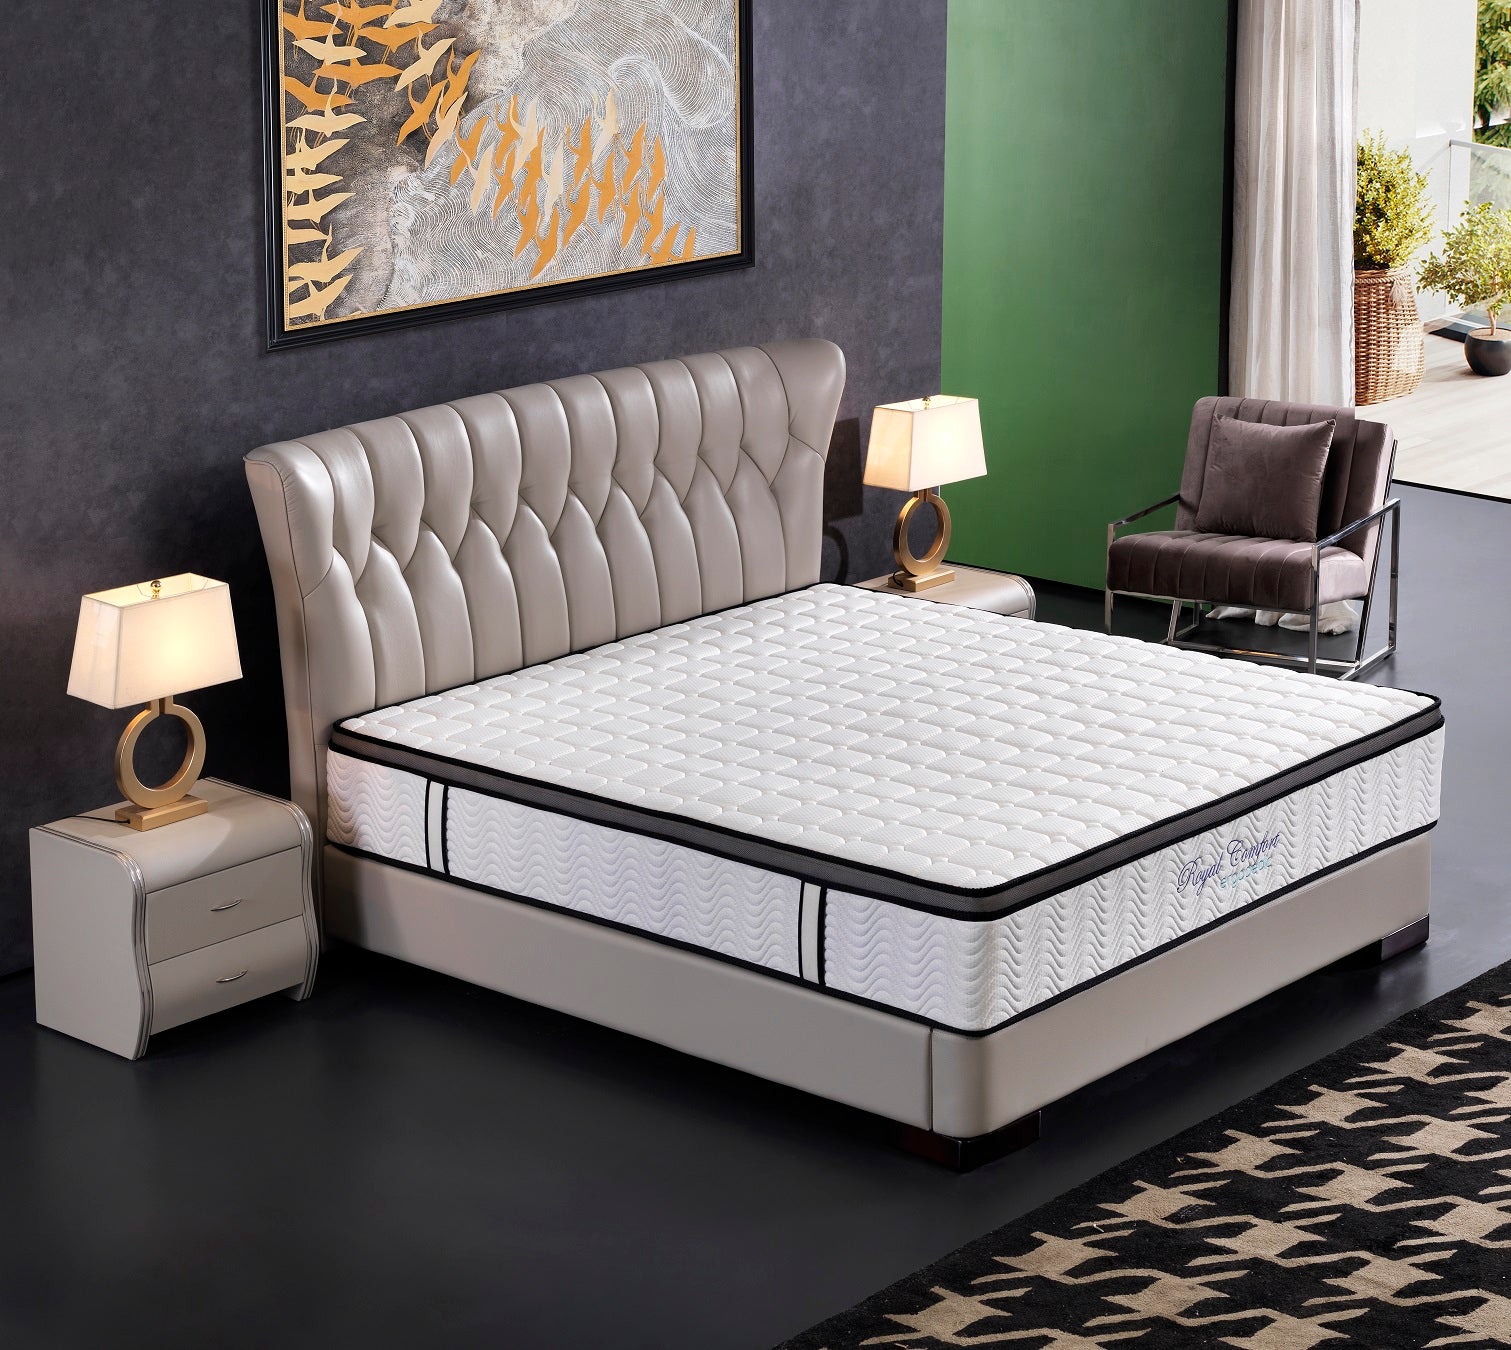 Double Size 30cm thick Ergopedic 5 Zone Latex Pocket Spring Mattress In A Box